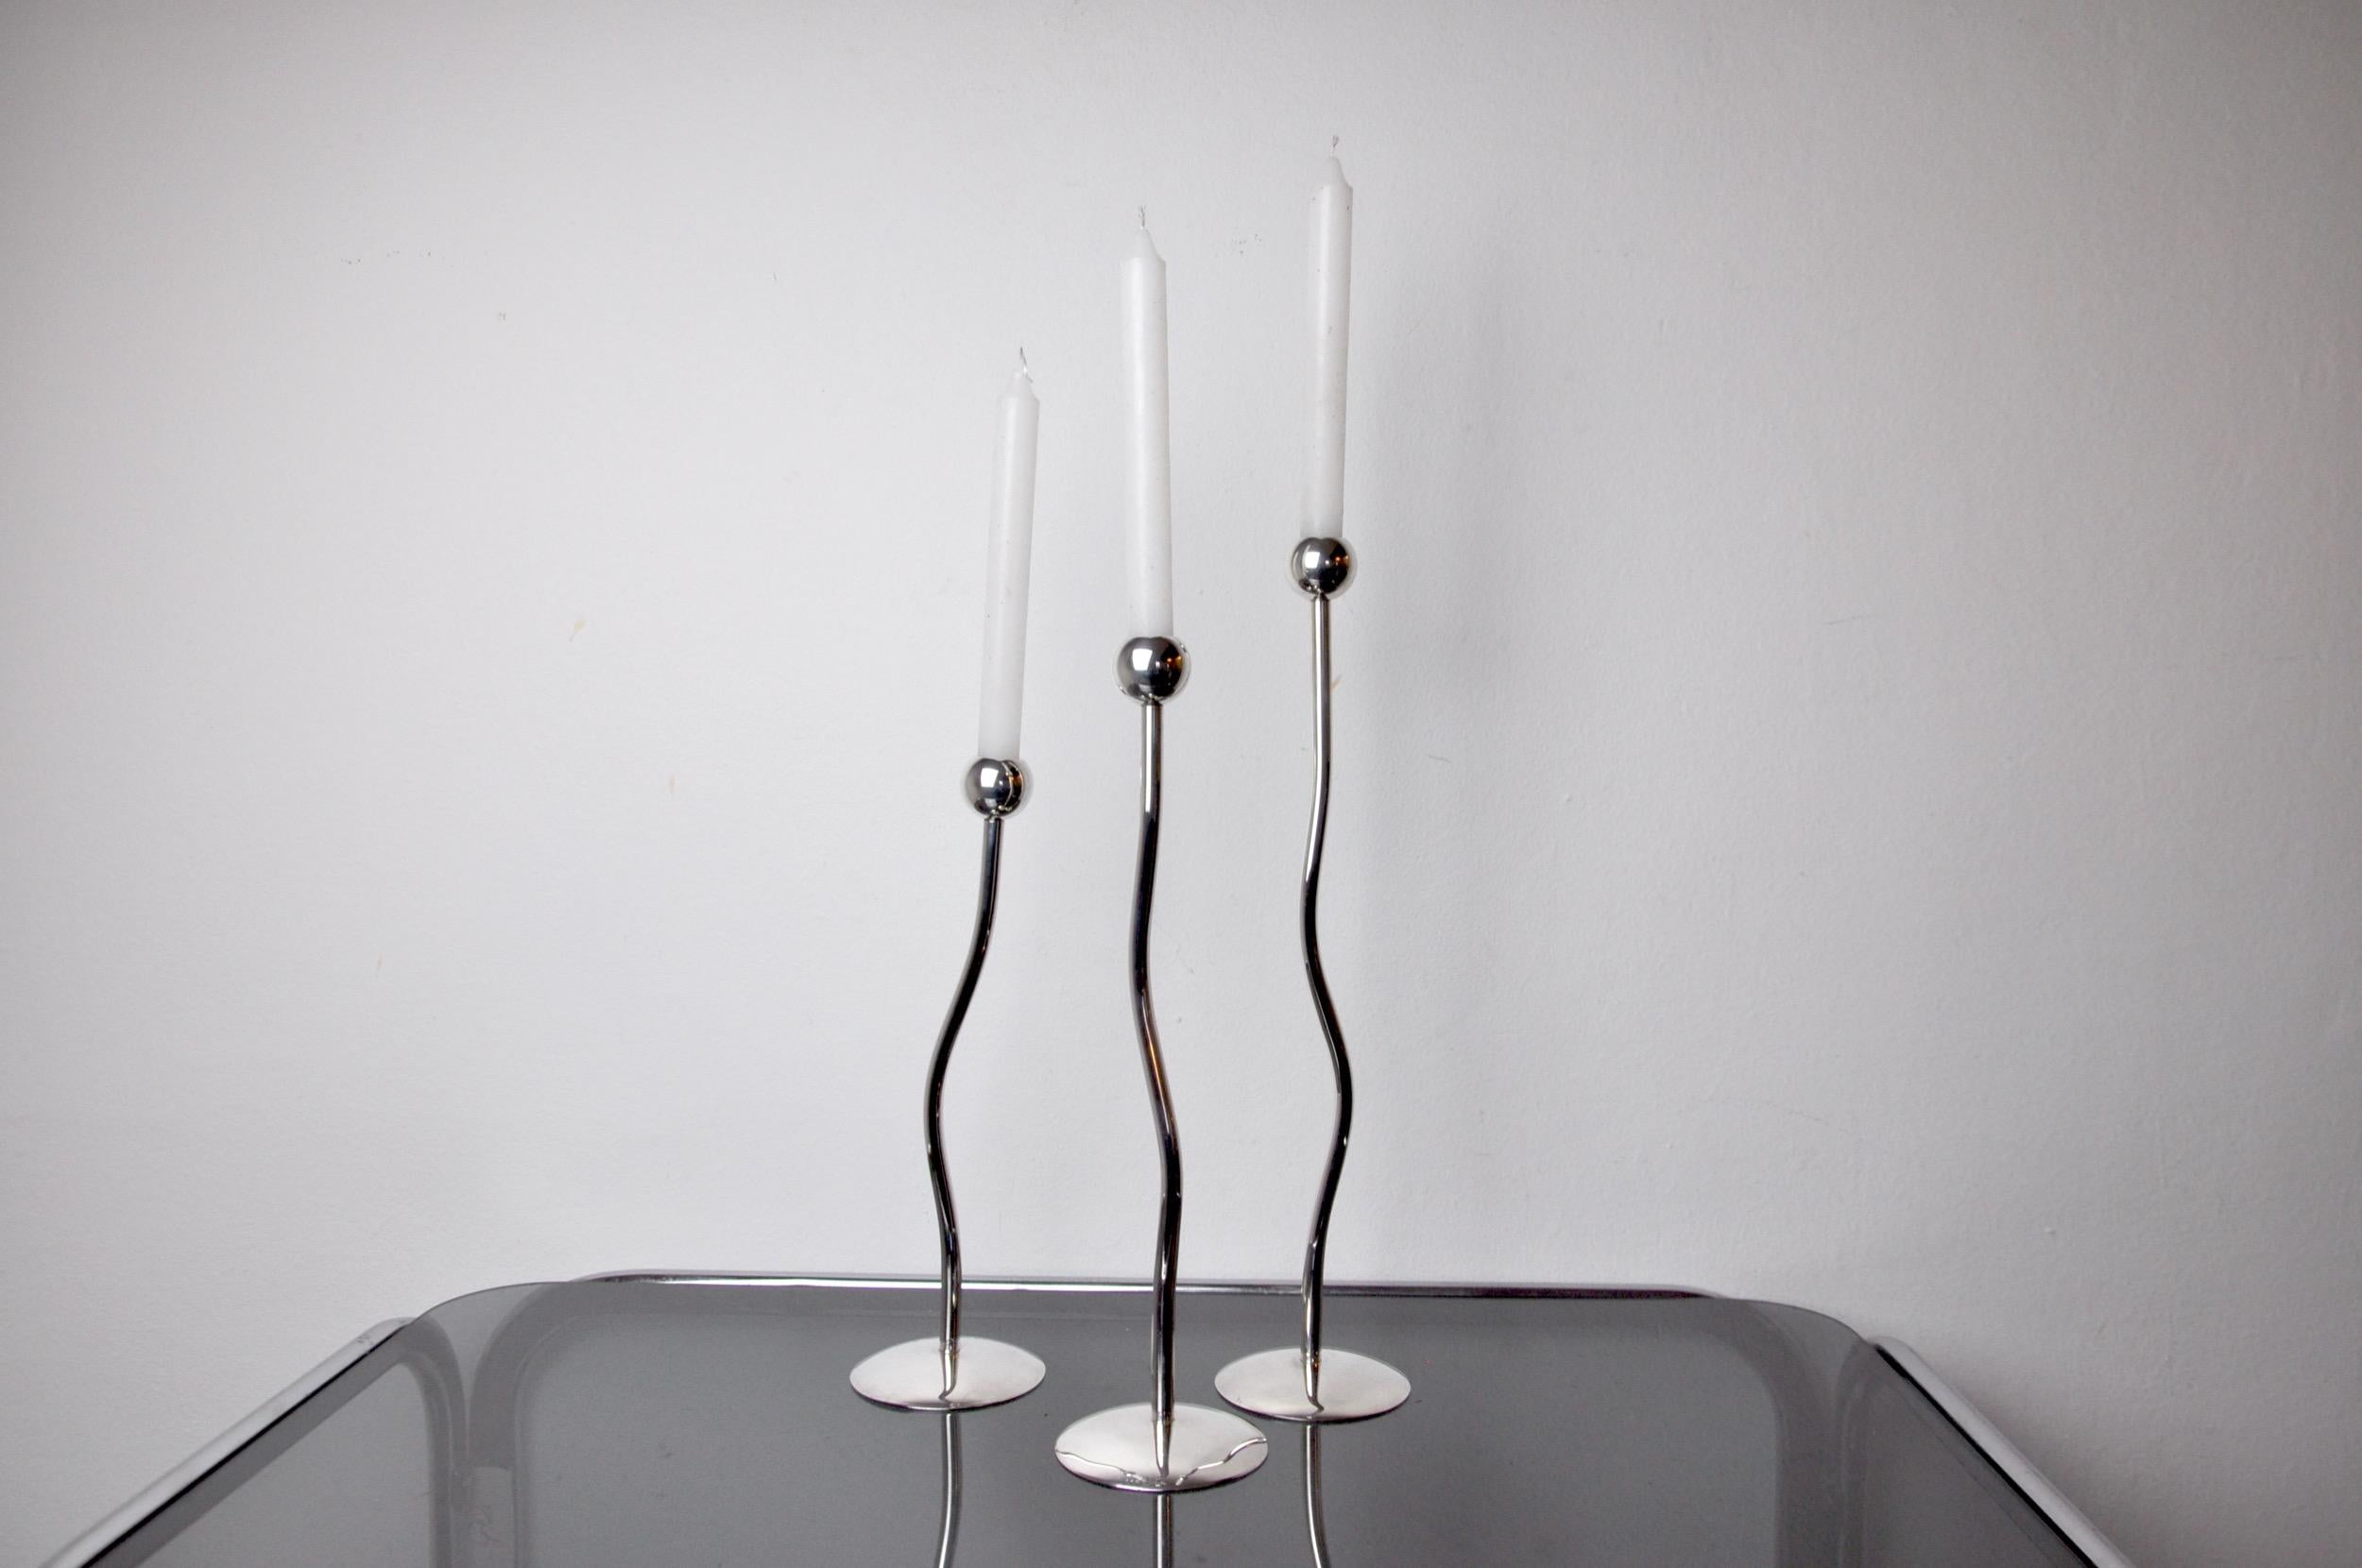 Superb trio of candelabras in silver metal produced by mesa italy in italy in the 1980s.

Stamped objects.

Real work of art because of their shape and dimensions.

Design objects that will decorate your interior perfectly.

Ref: 948